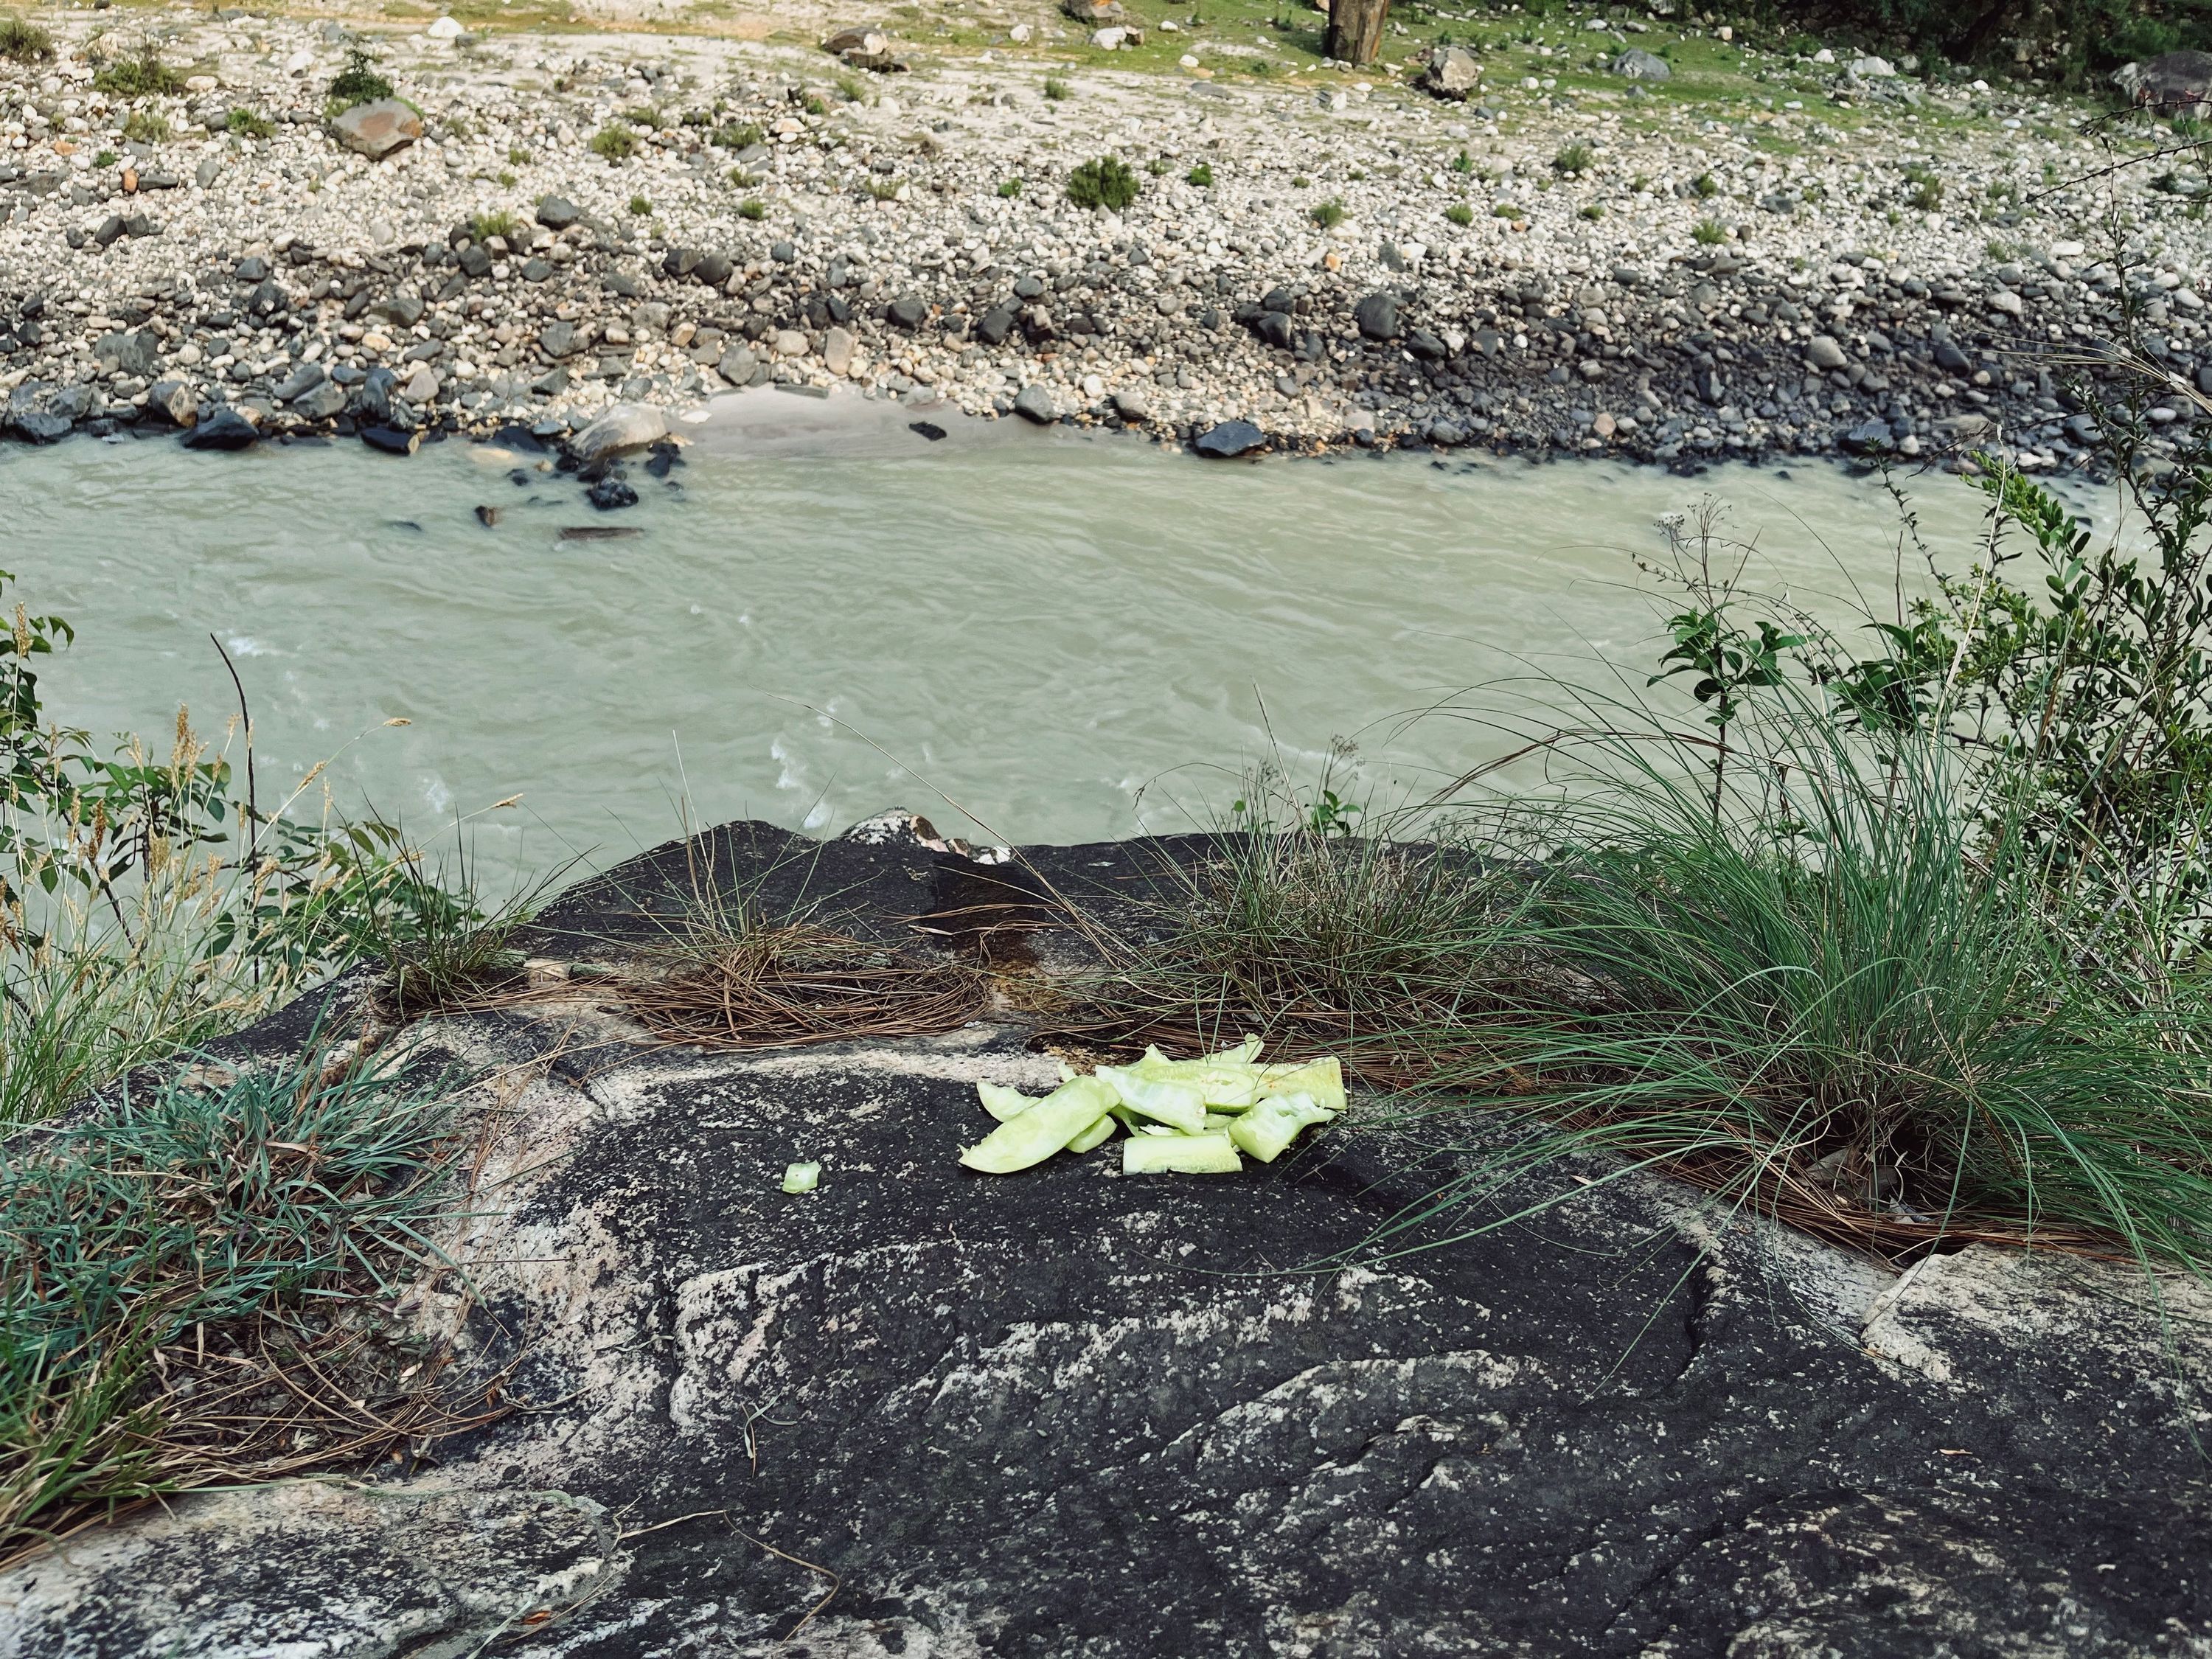 Cucumbers that I left for others on a rock on the Gangotri road.